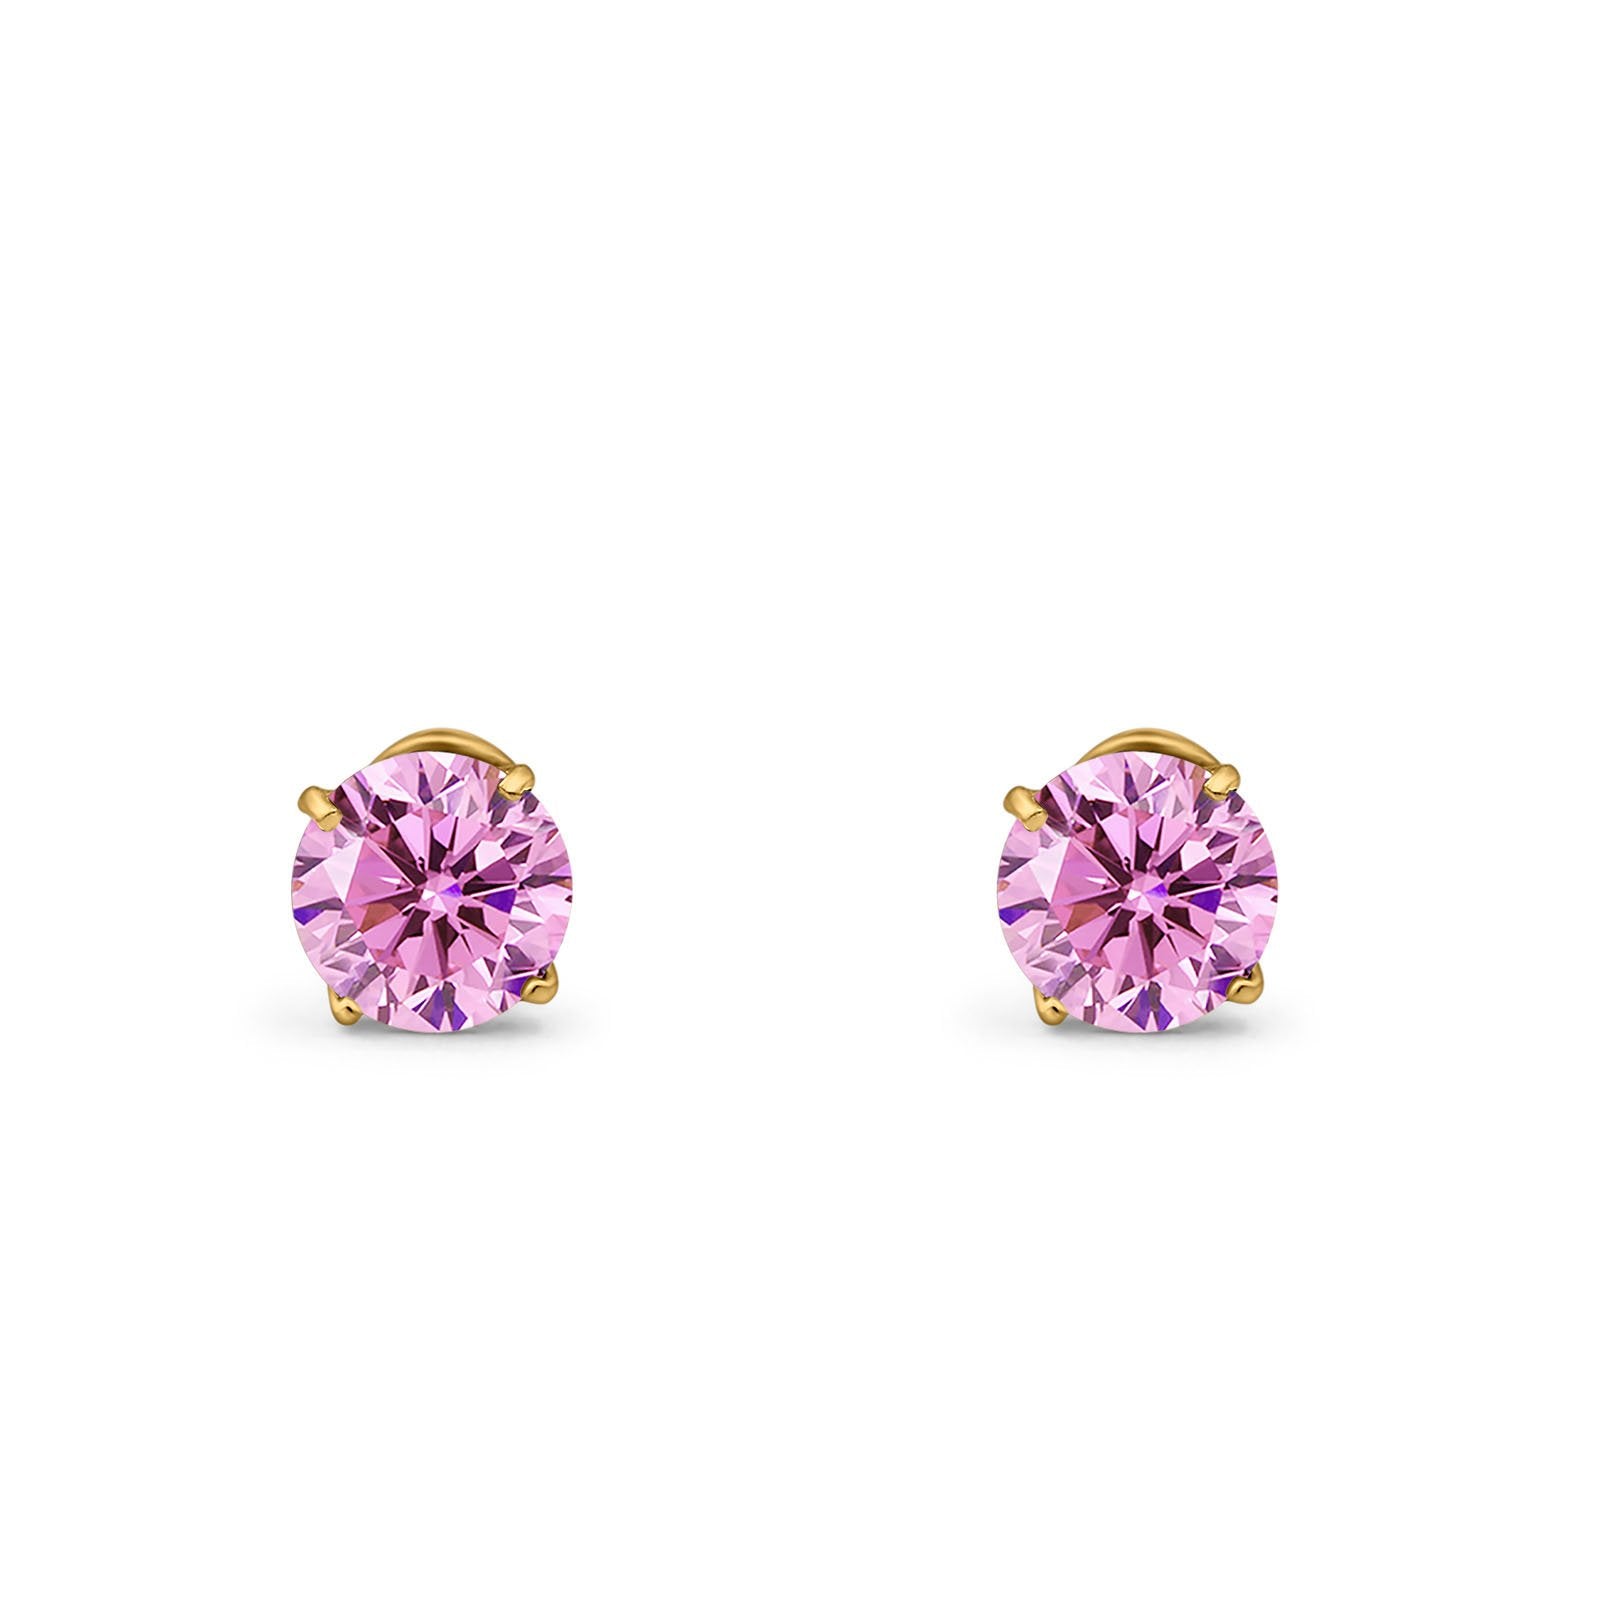 14k Yellow Gold Round Solitaire Stud Earrings with Screw Back Simulate